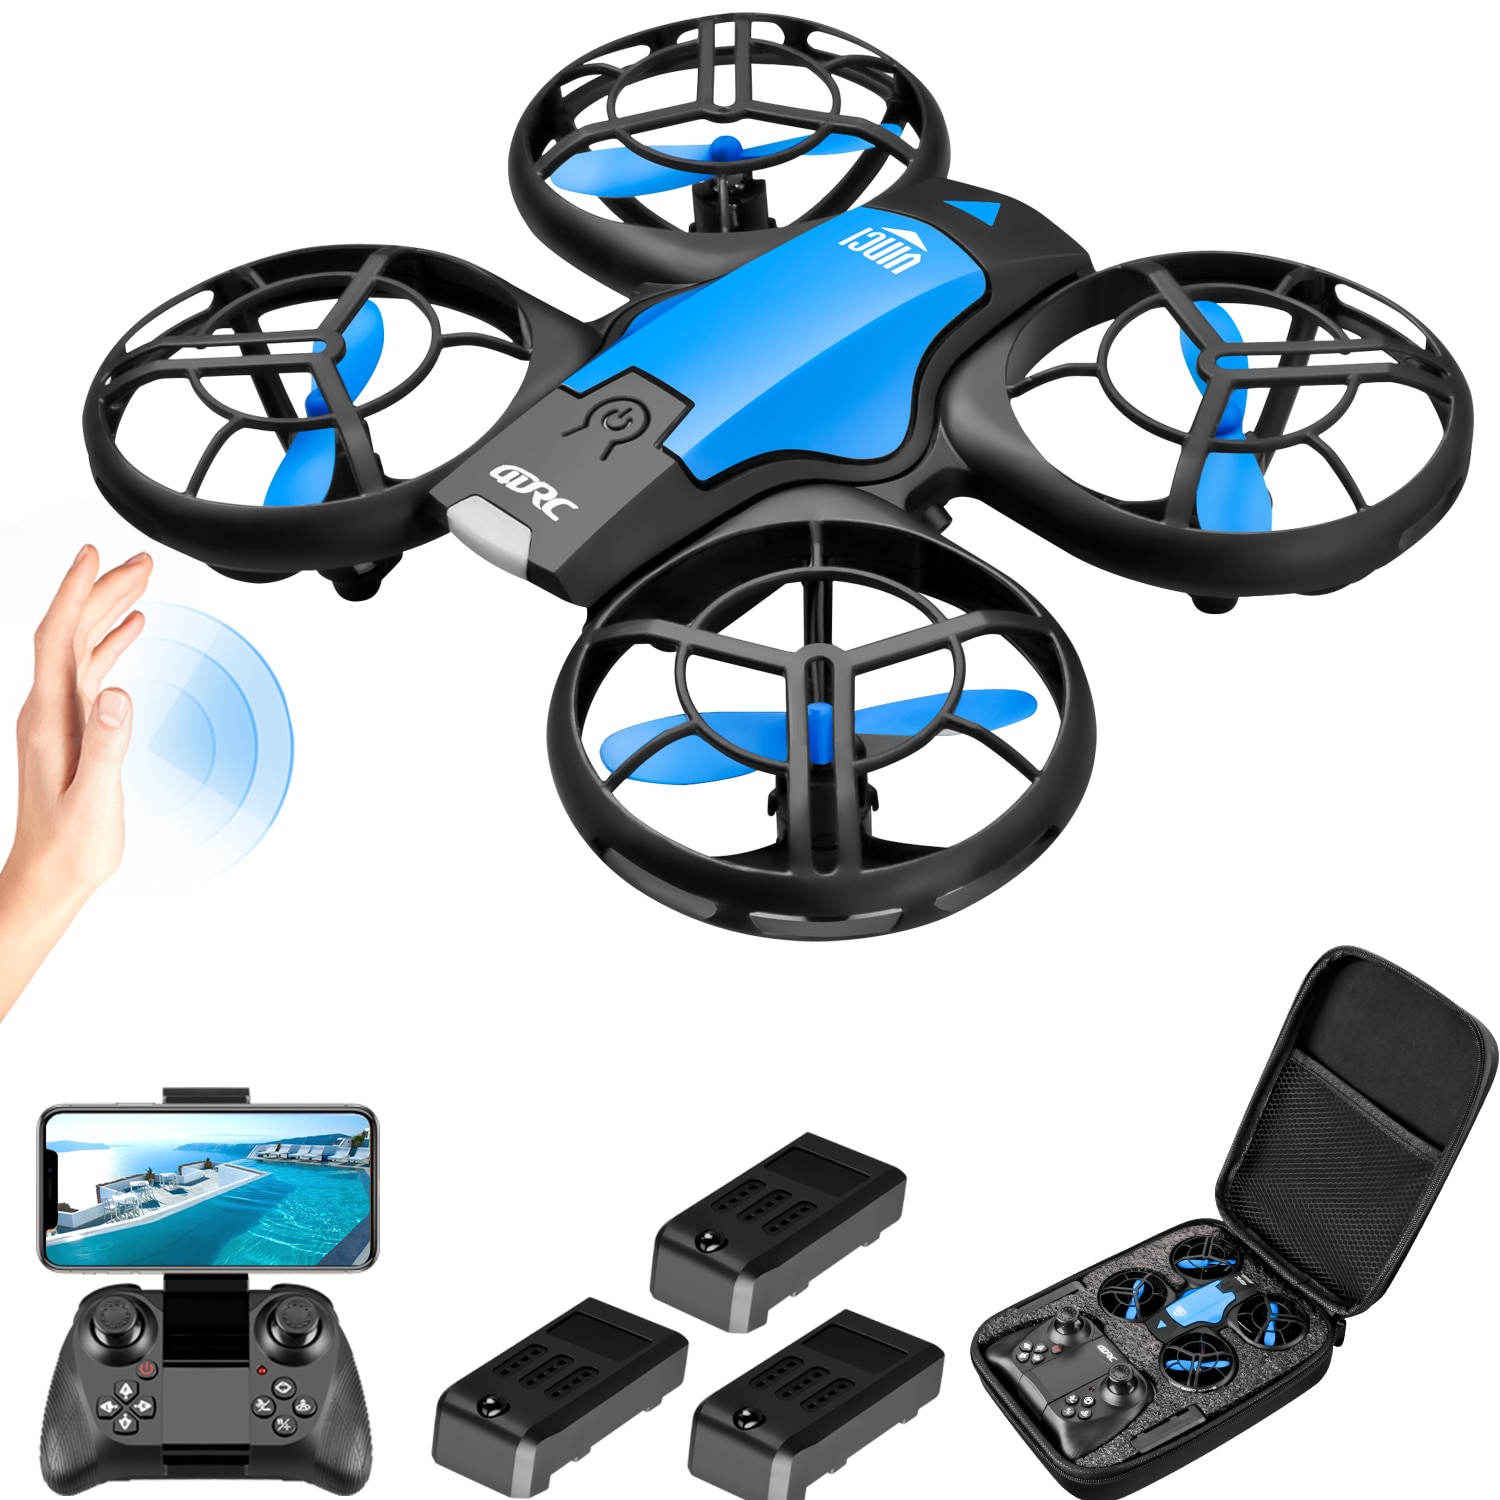 V8 New Mini Drone 4K 1080P HD Camera Drones WiFi Fpv Air Pressure Height Maintain Foldable Quadcopter RC Dron Toy Gift